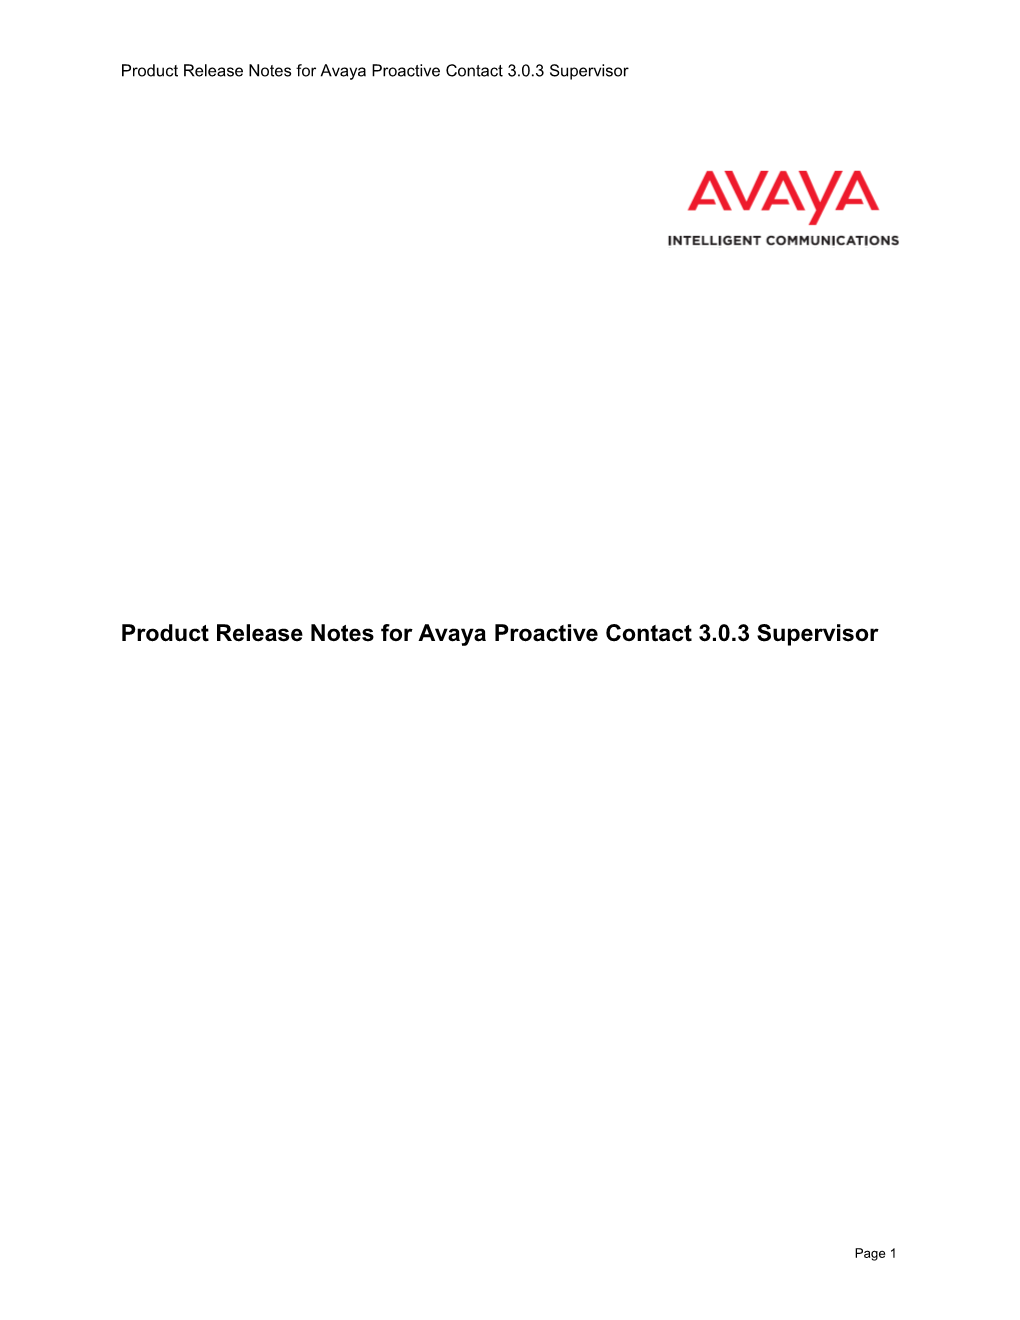 Product Release Notes for Avaya Proactive Contact 3.0.3 Supervisor